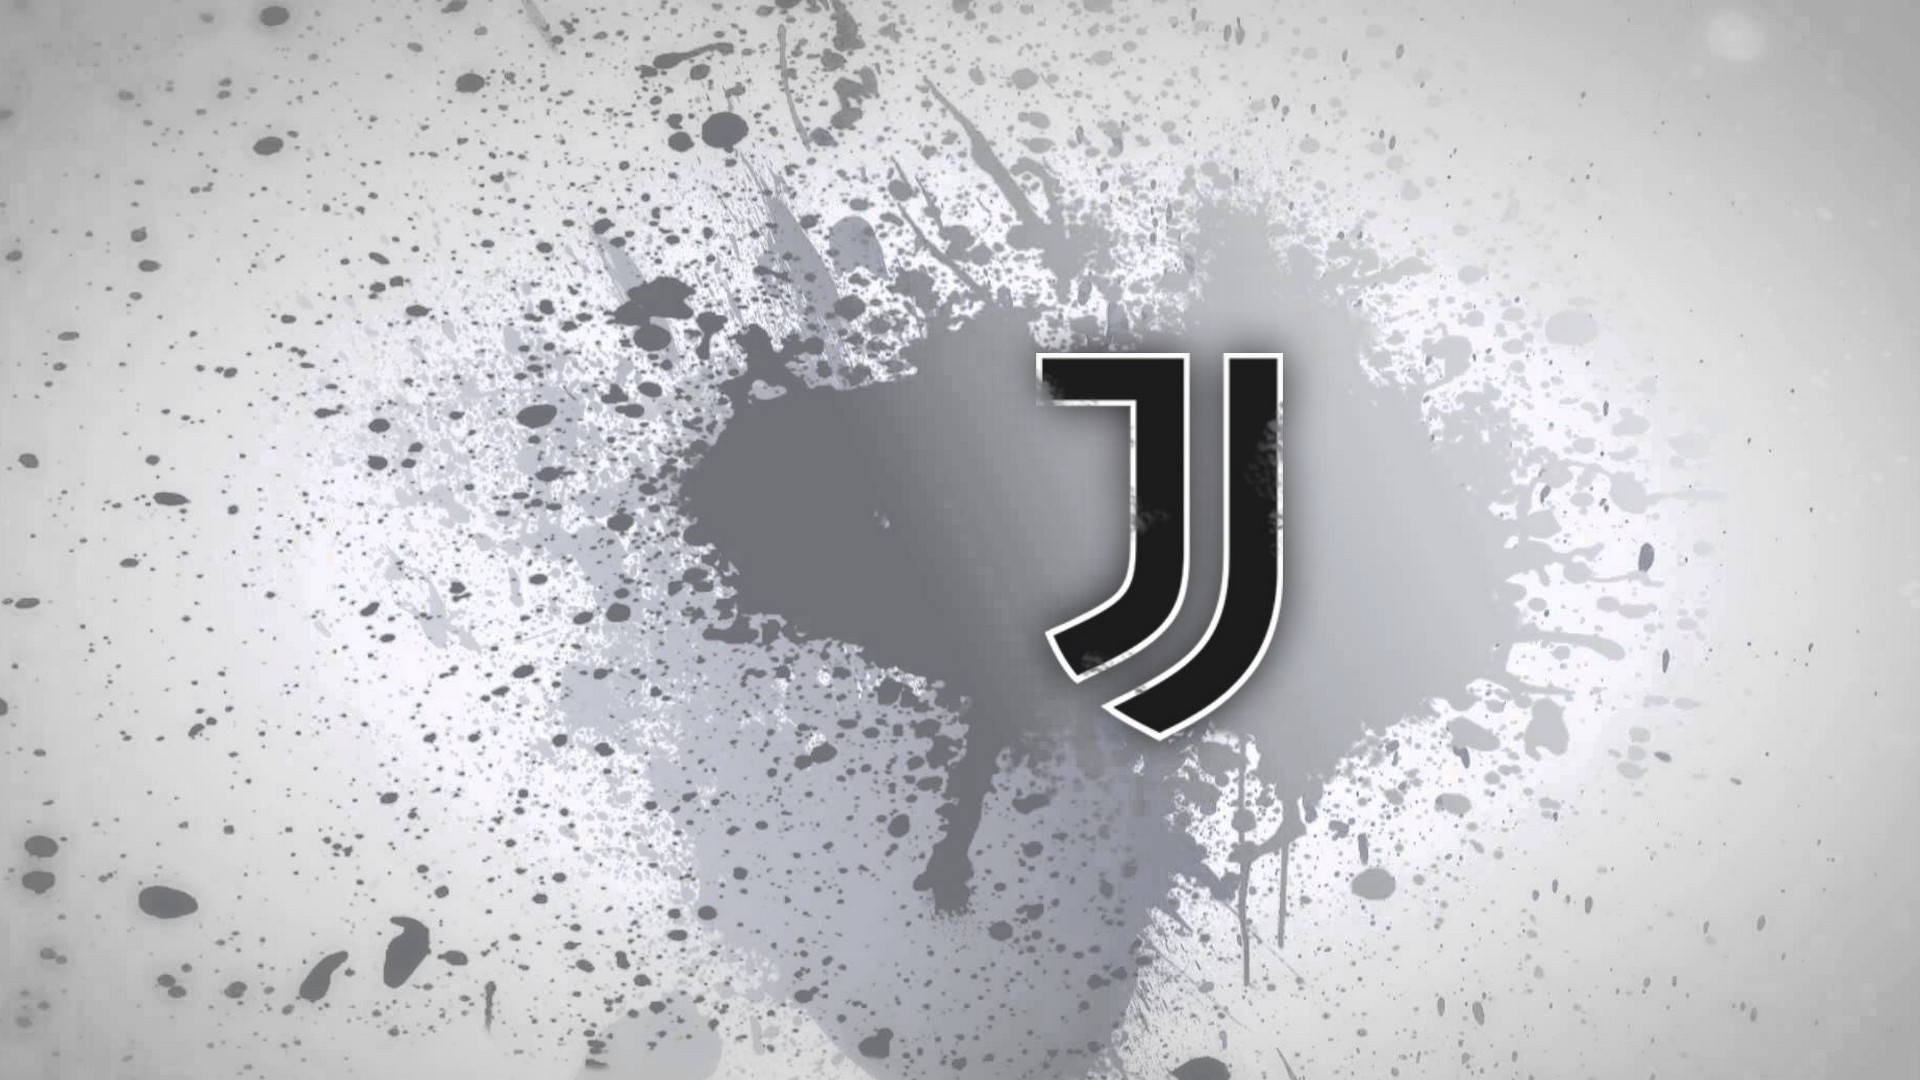 Juventus Soccer For PC Wallpaper With Resolution 1920X1080 pixel. You can make this wallpaper for your Mac or Windows Desktop Background, iPhone, Android or Tablet and another Smartphone device for free